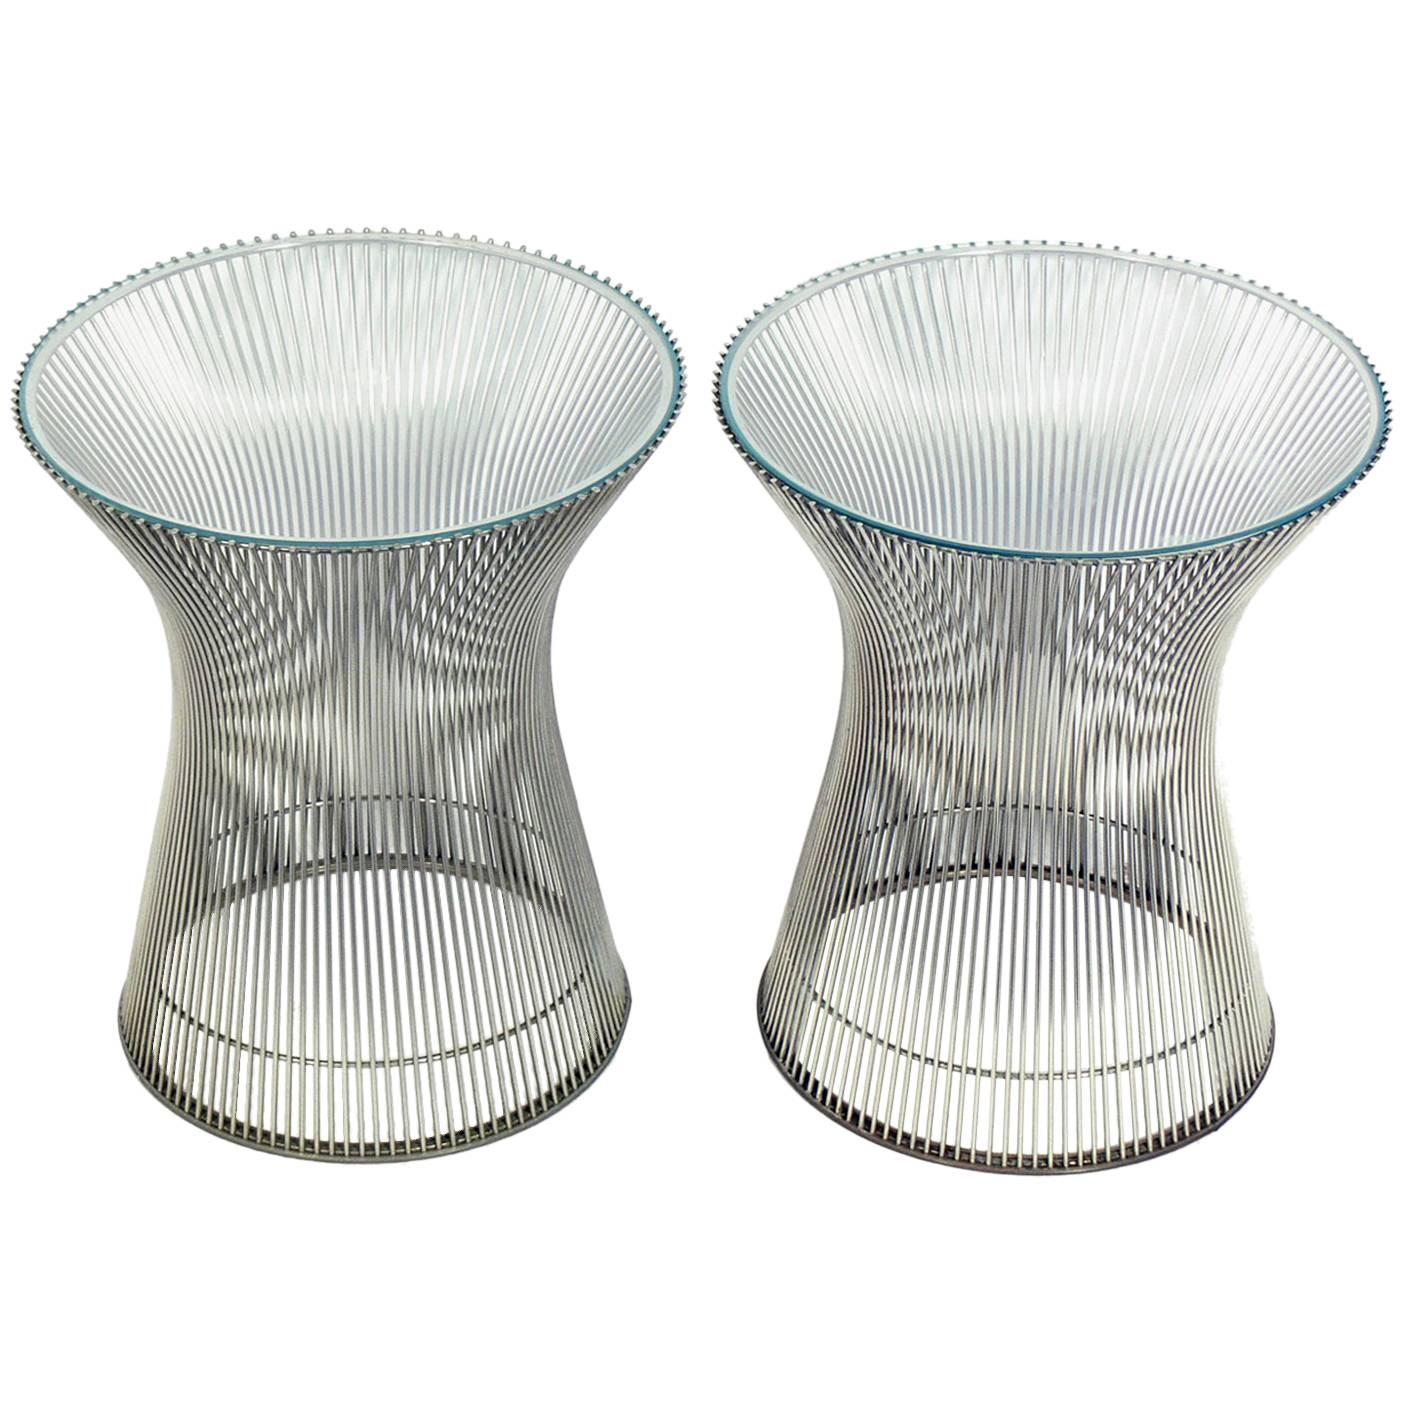 Pair of Sculptural Chrome Tables by Warren Platner for Knoll